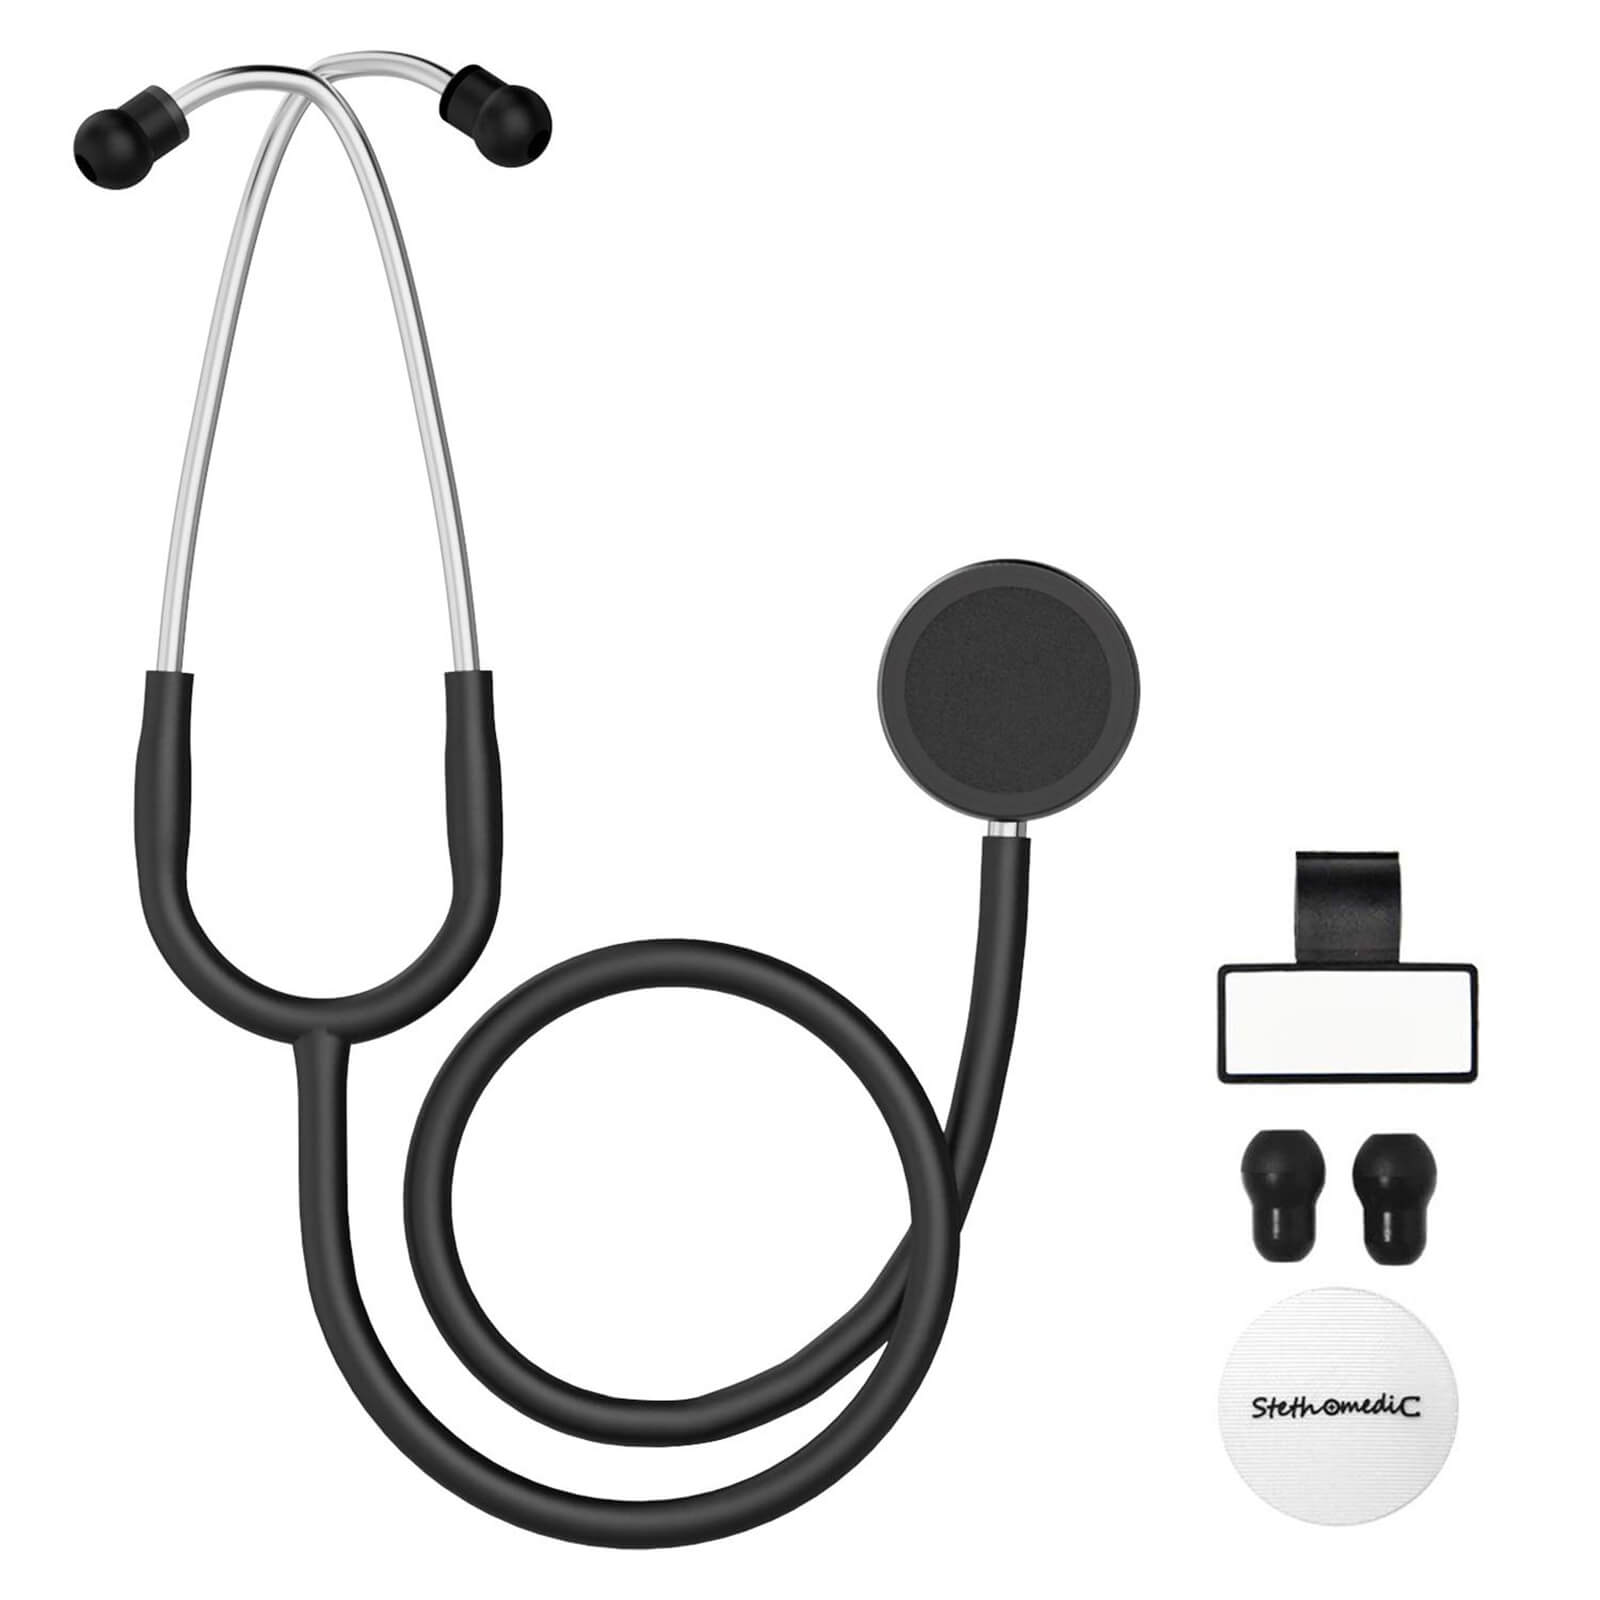 Dr. Head Dual Head Stethoscope Assorted Color For Doctors